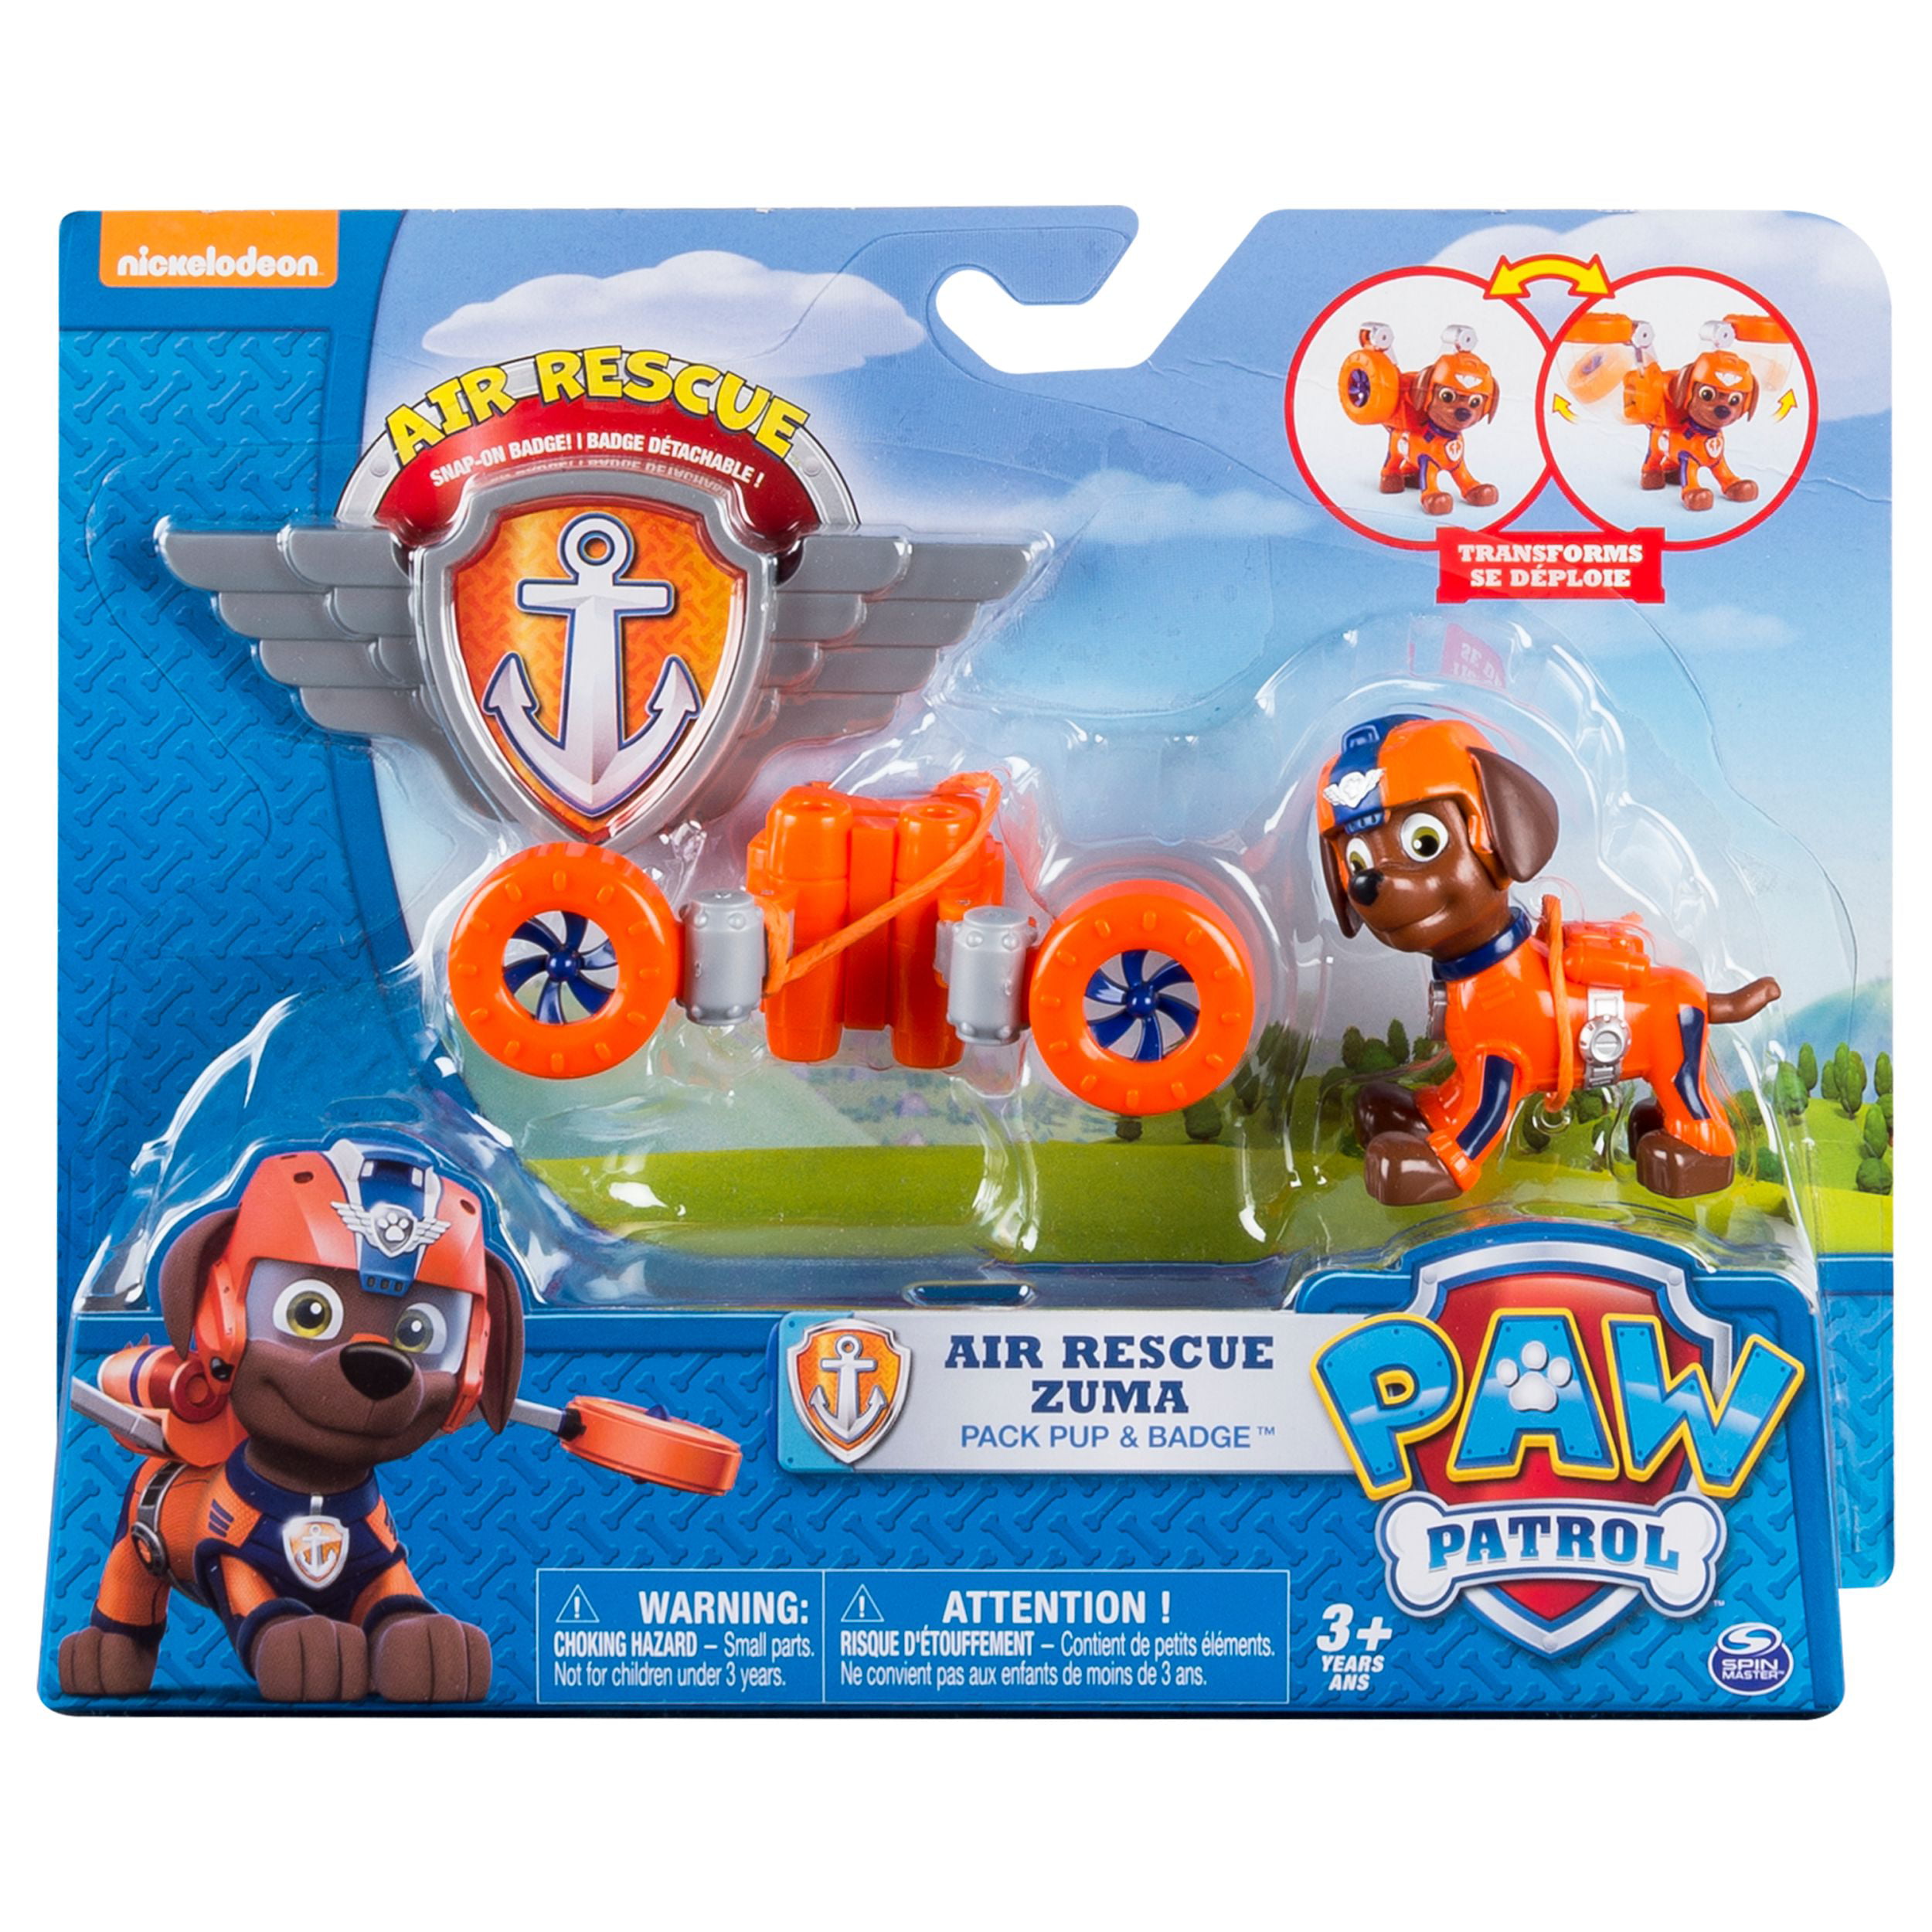 Paw Patrol: Zuma RealBig - Officially Licensed Nickelodeon Removable A